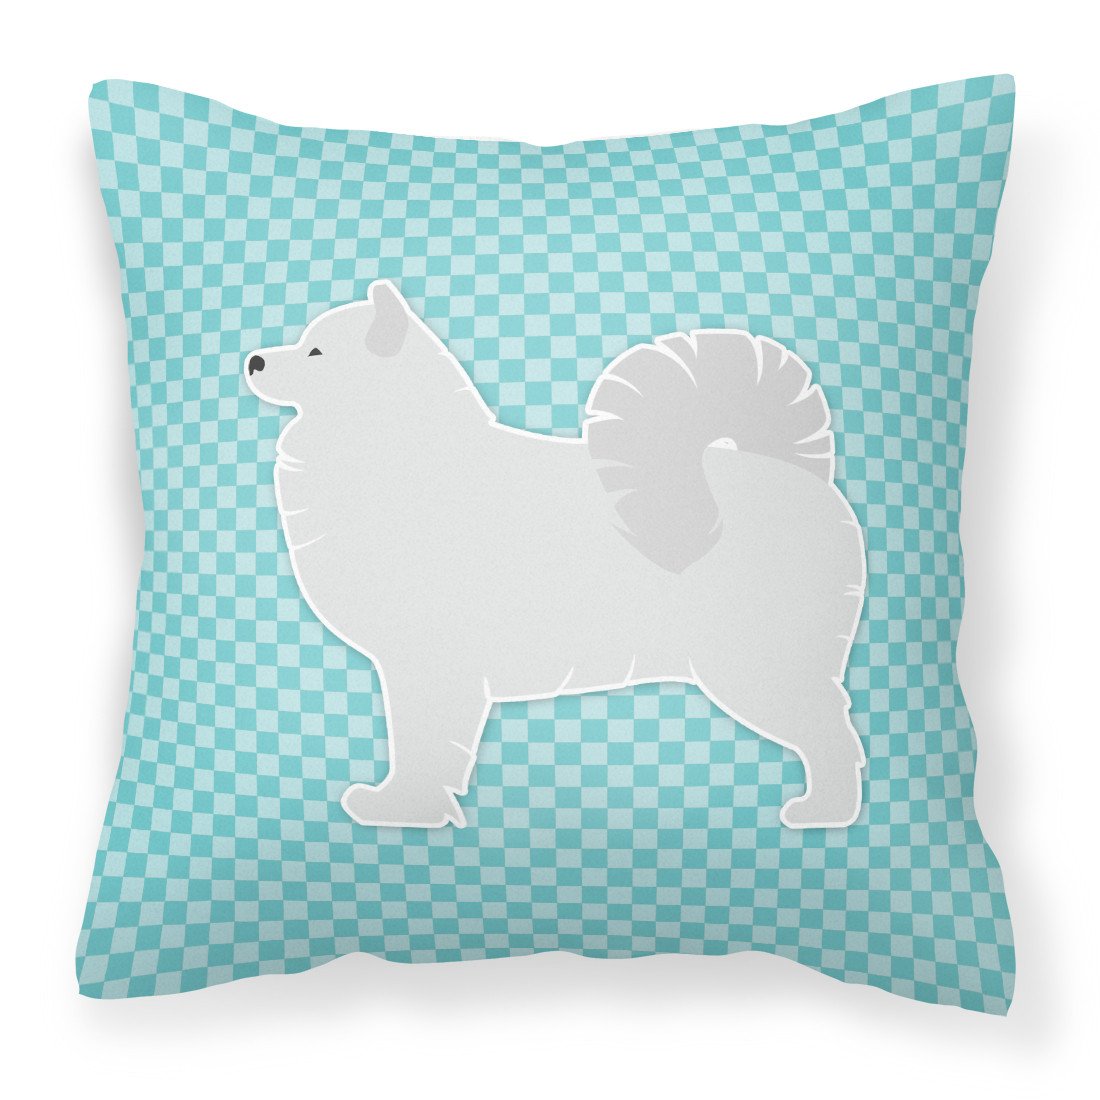 Samoyed Checkerboard Blue Fabric Decorative Pillow BB3759PW1818 by Caroline's Treasures